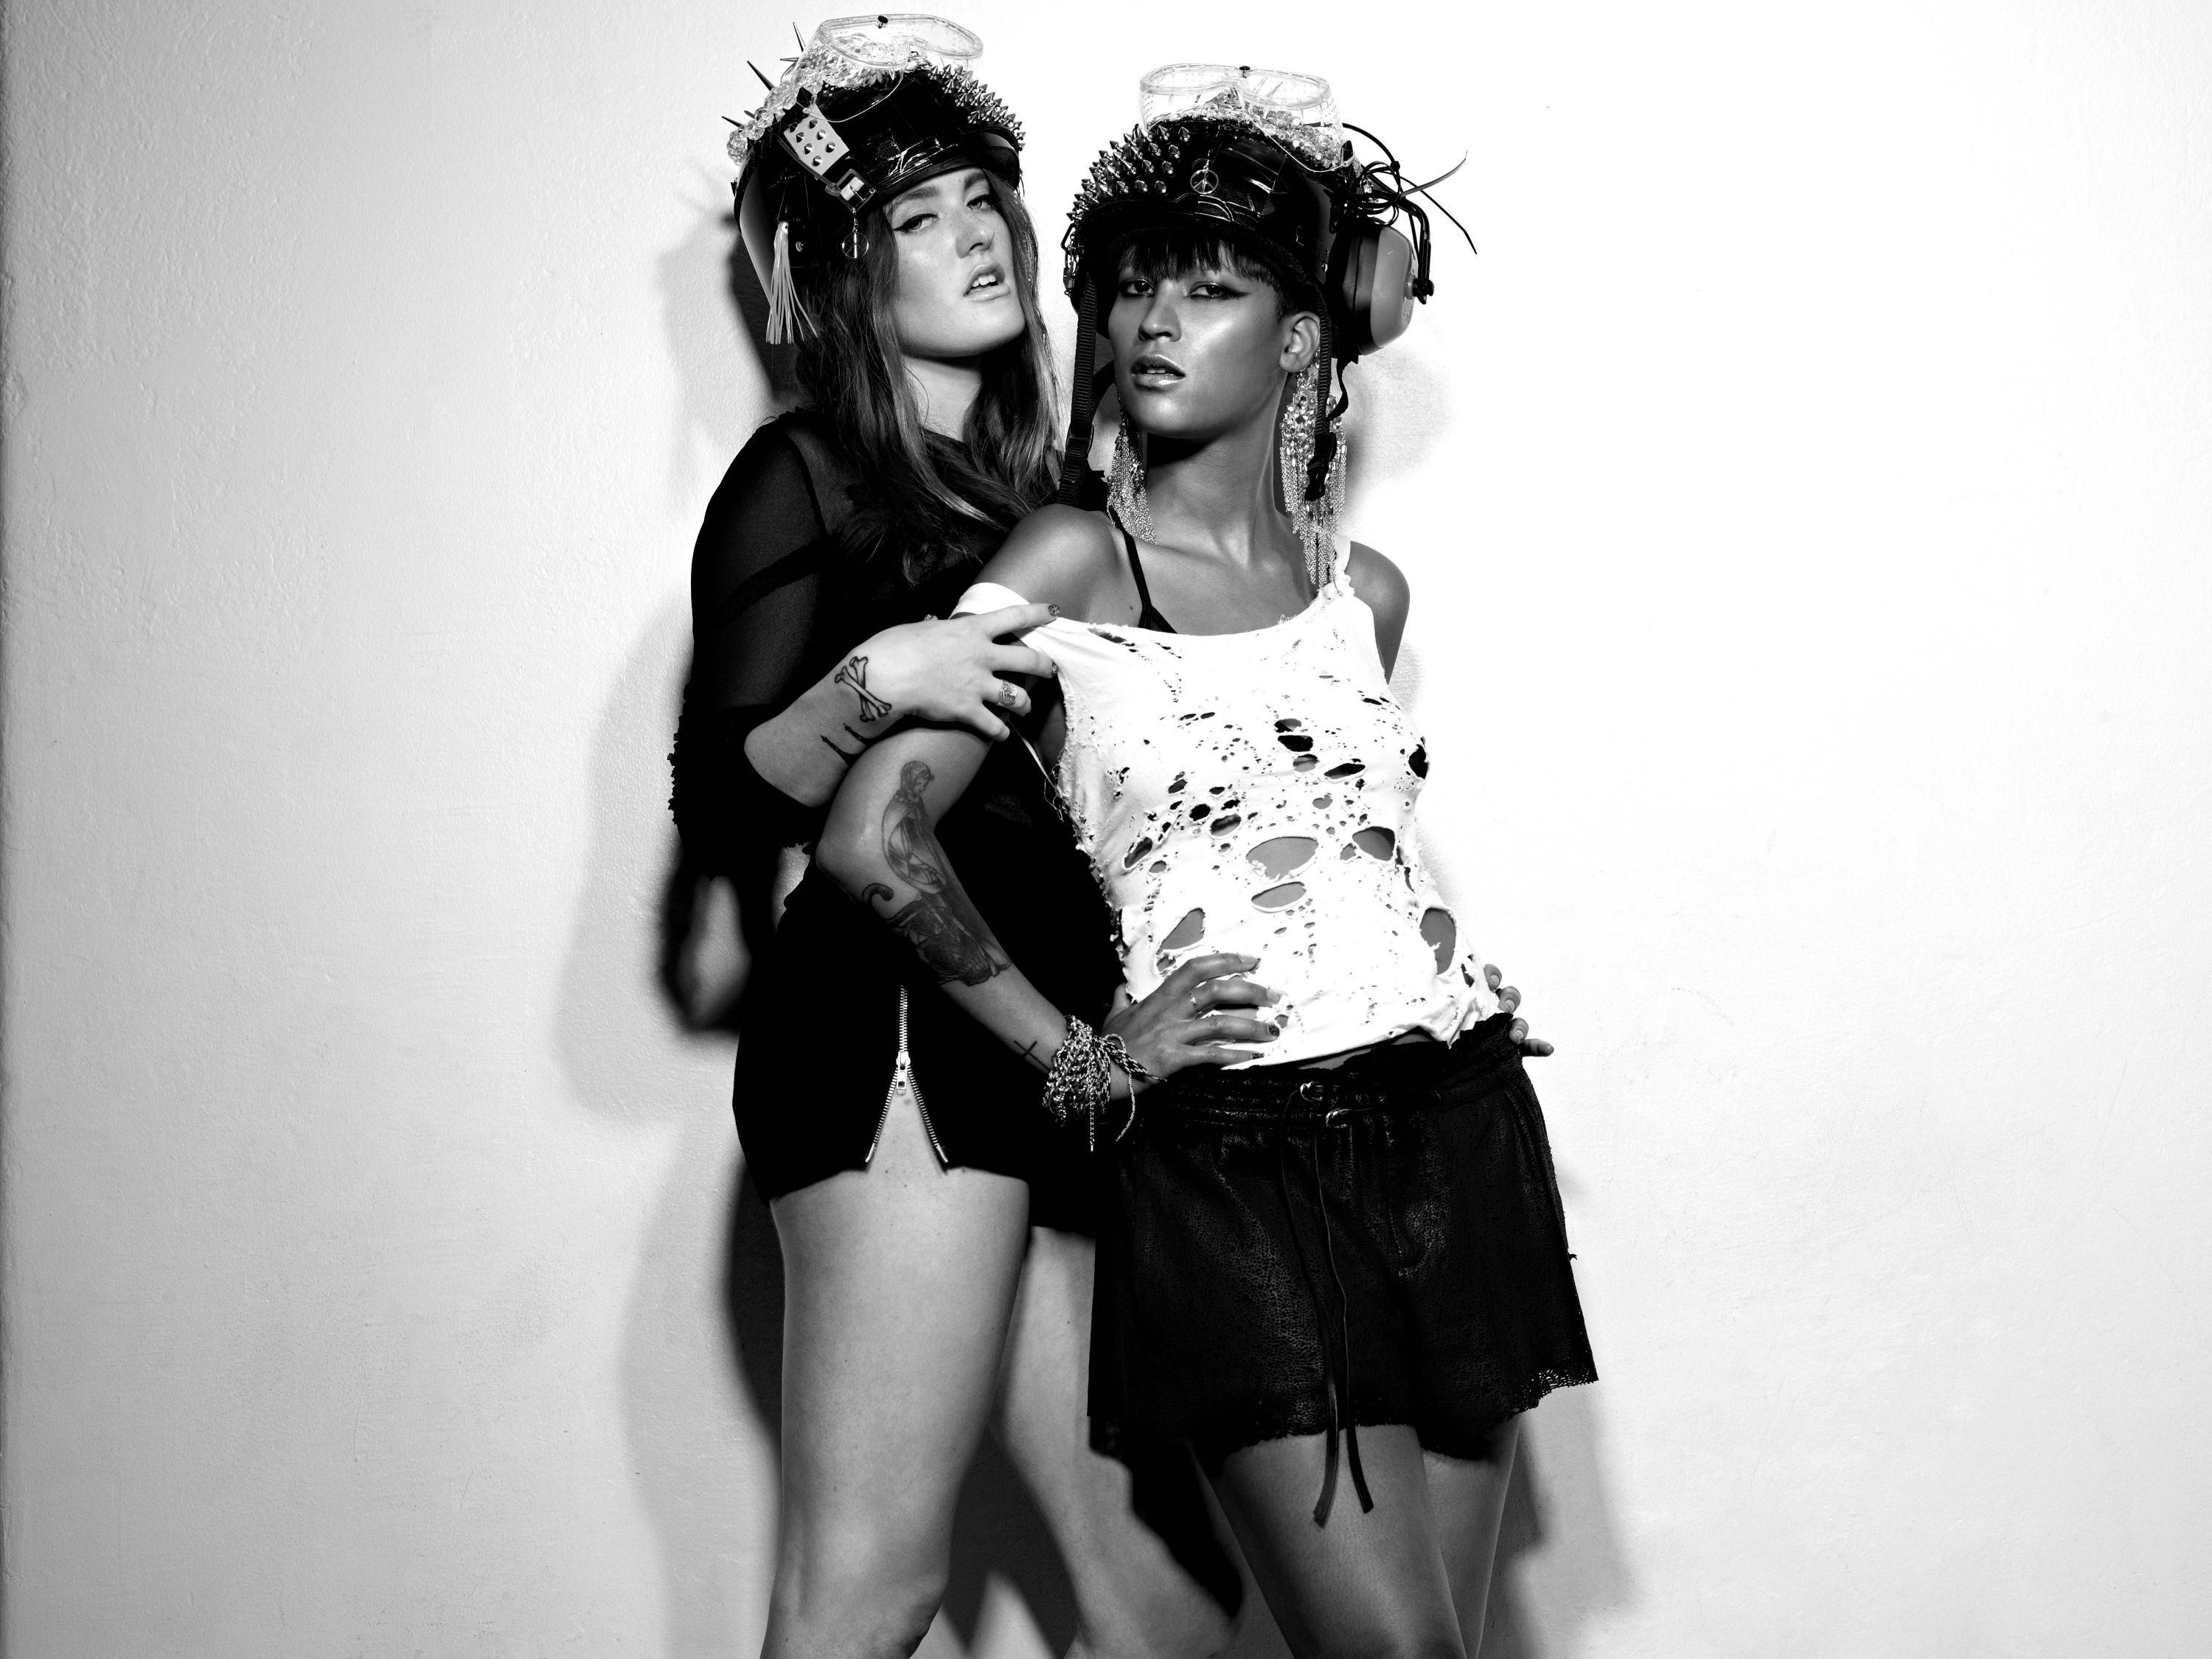 icona pop, Dance, Pop, Electro, Electronic, House, D j, Indie, Icona Wallpaper